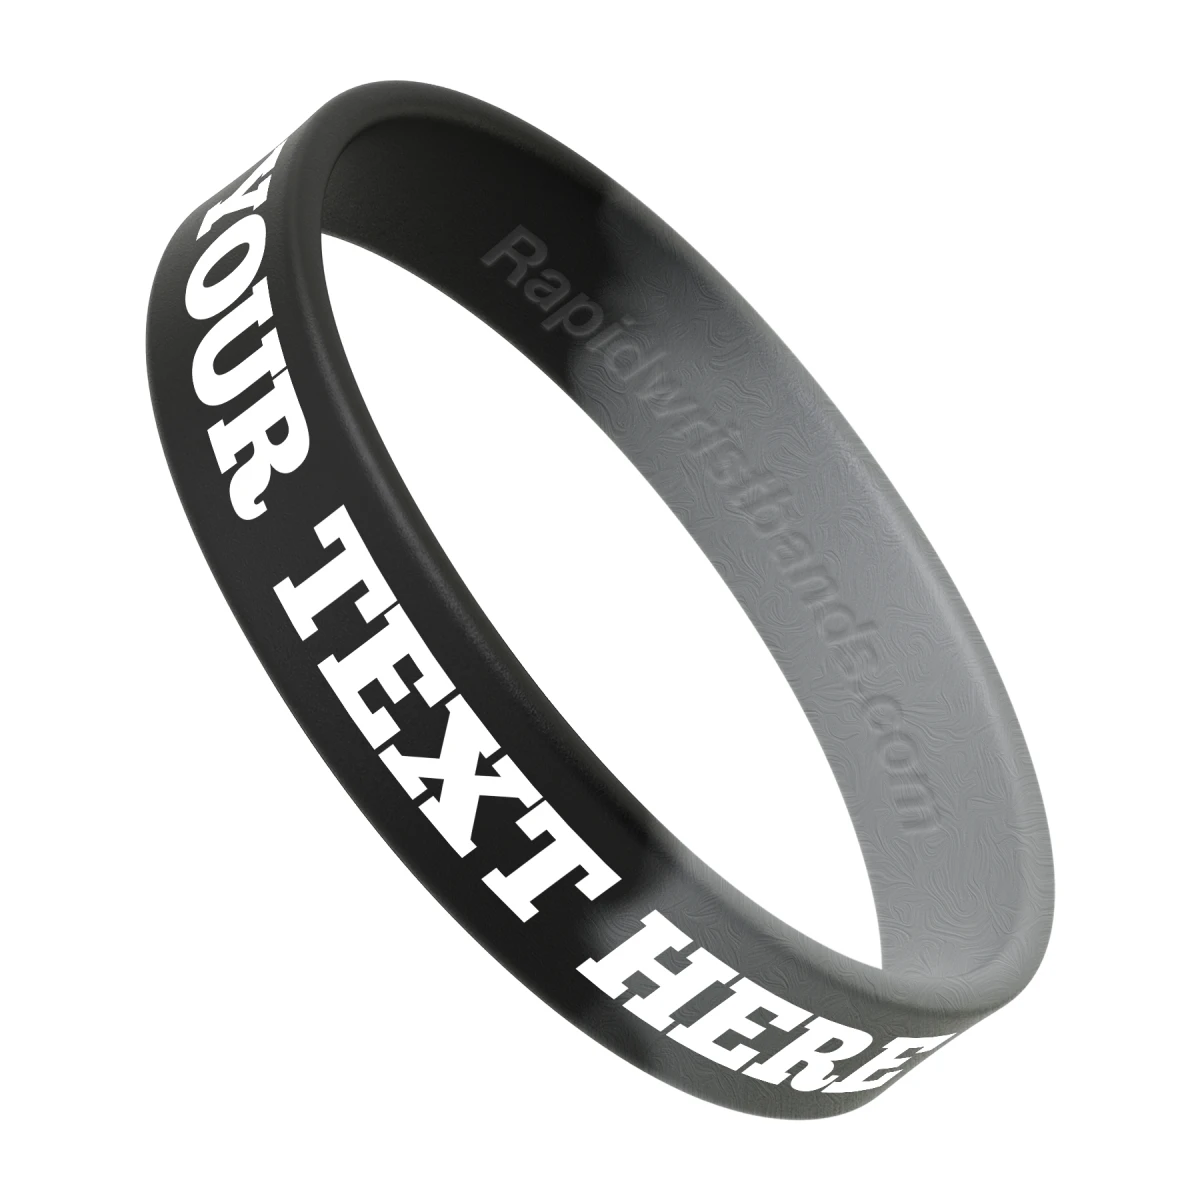 Segmented Black/Silver Wristband With Your Text Here Printed In White